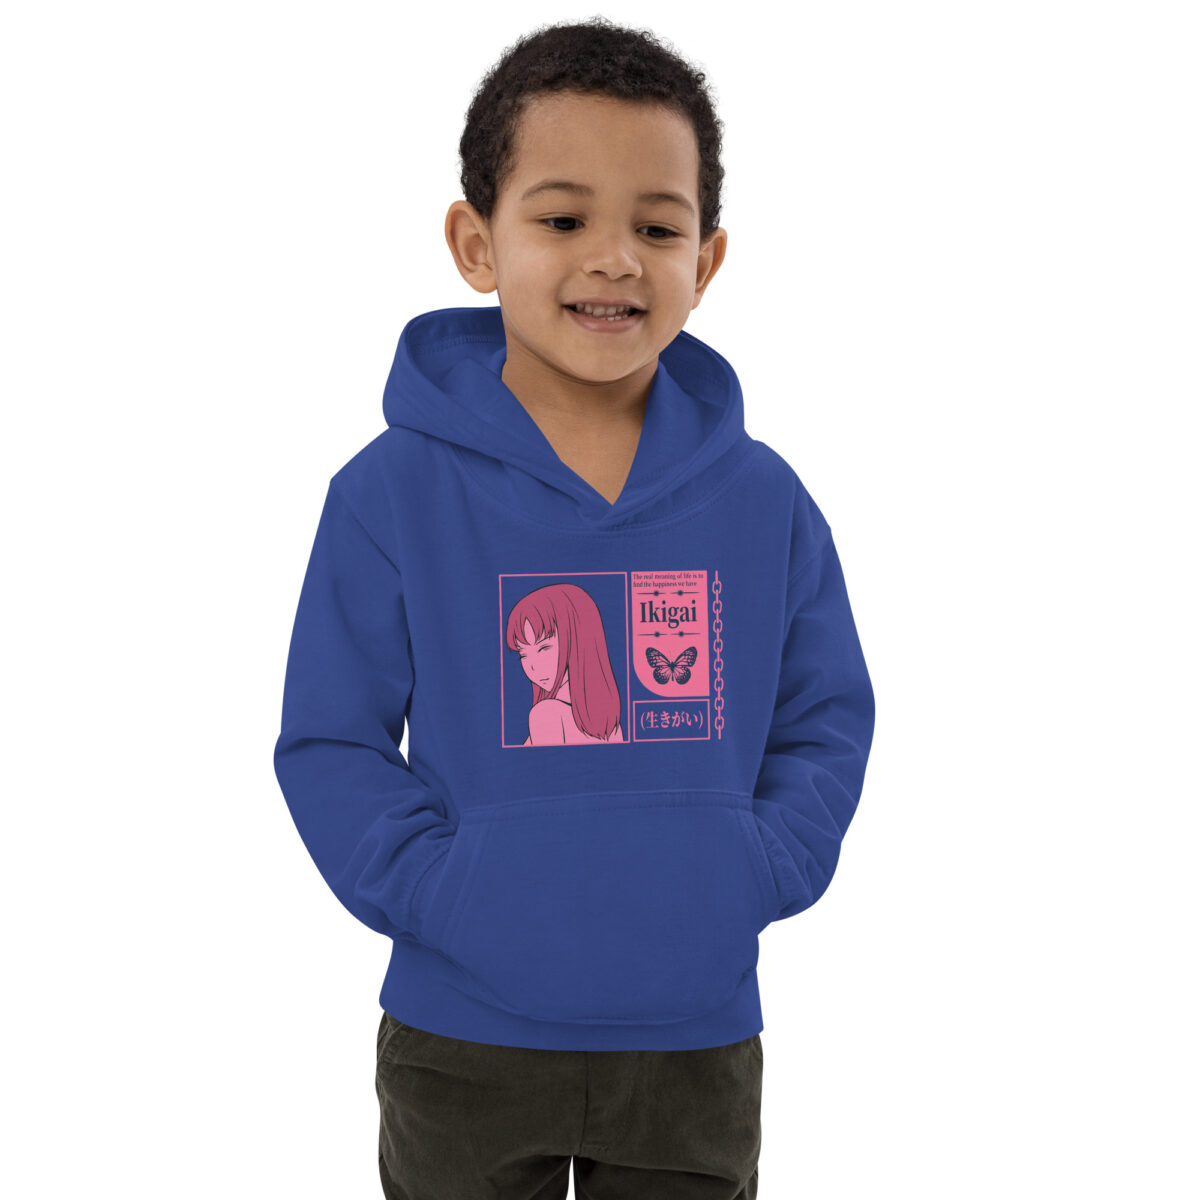 kids hoodie royal blue front 6475cced238c2